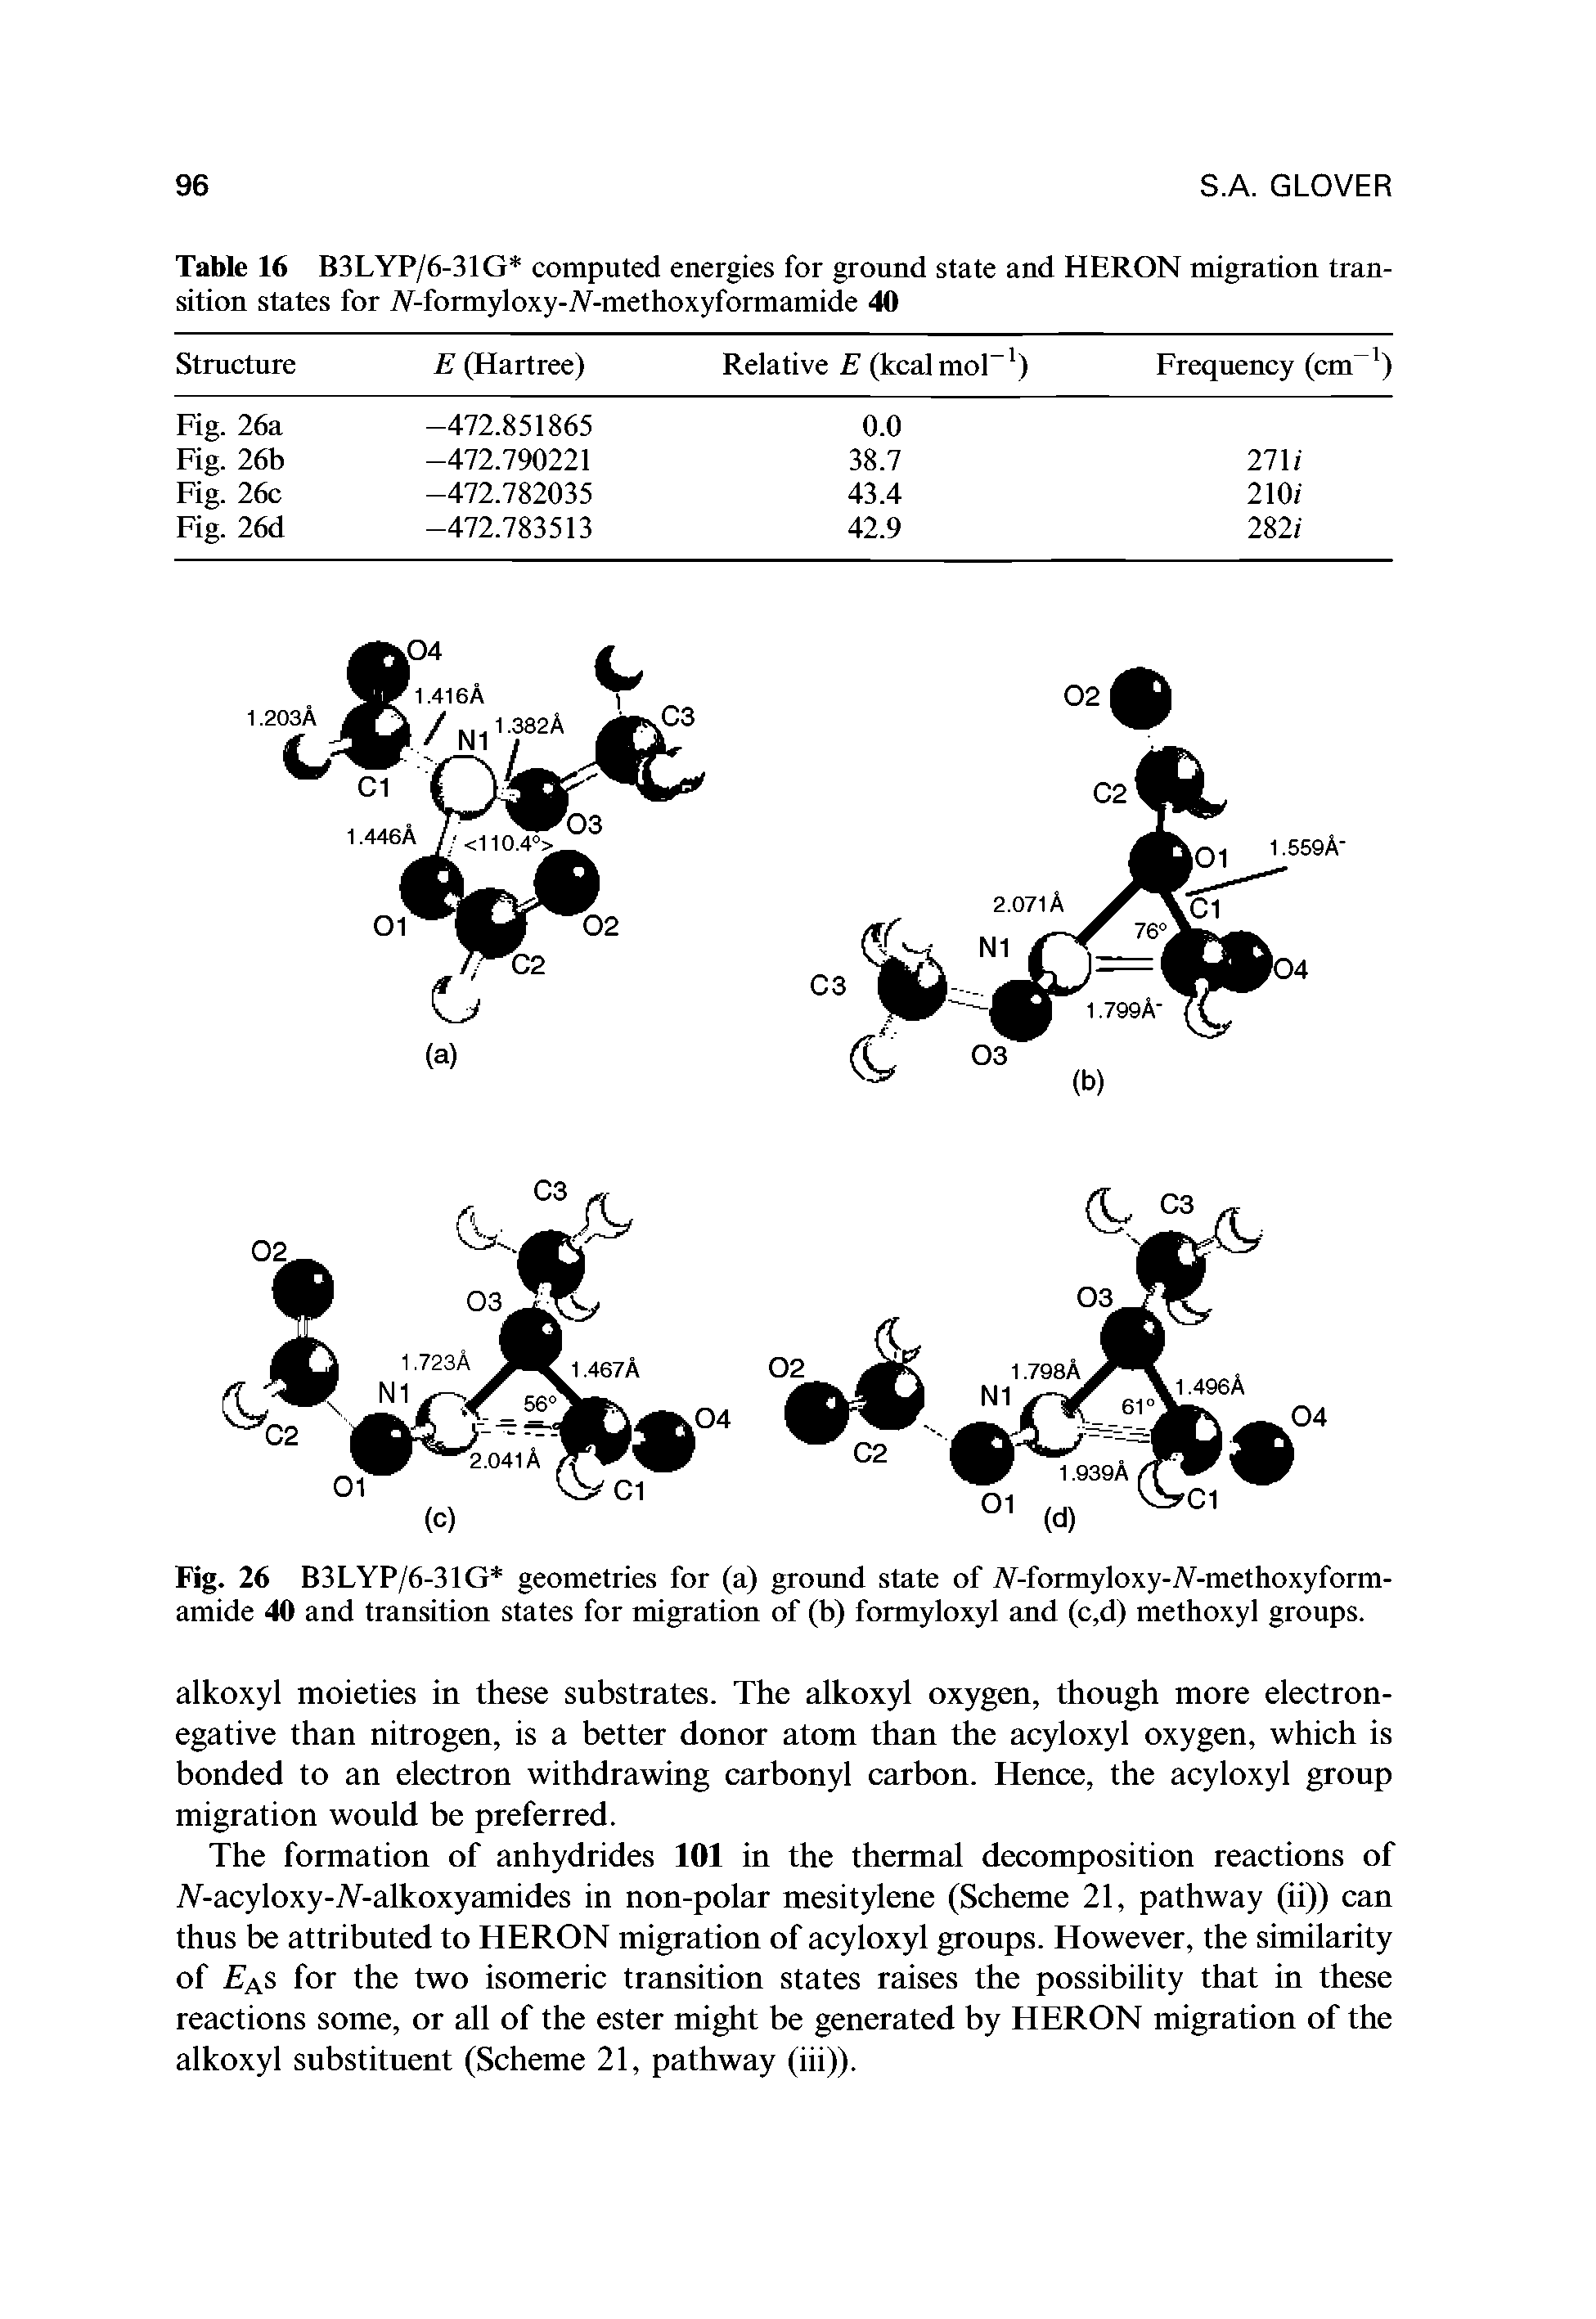 Fig. 26 B3LYP/6-31G geometries for (a) ground state of A,-l ormyloxy-A,-methoxyform-amide 40 and transition states for migration of (b) formyloxyl and (c,d) methoxyl groups.